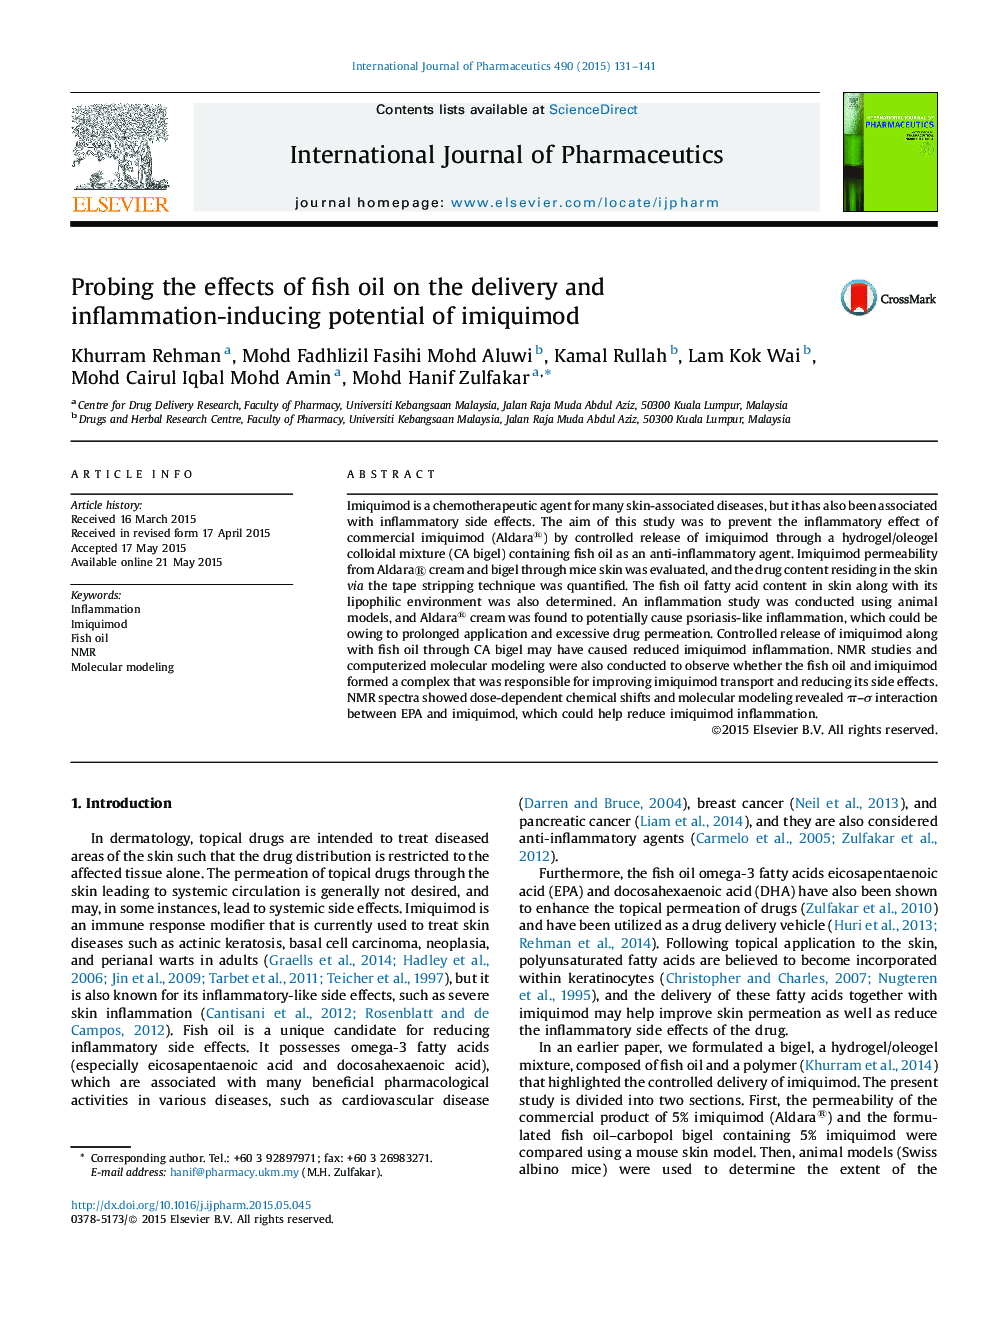 Probing the effects of fish oil on the delivery and inflammation-inducing potential of imiquimod